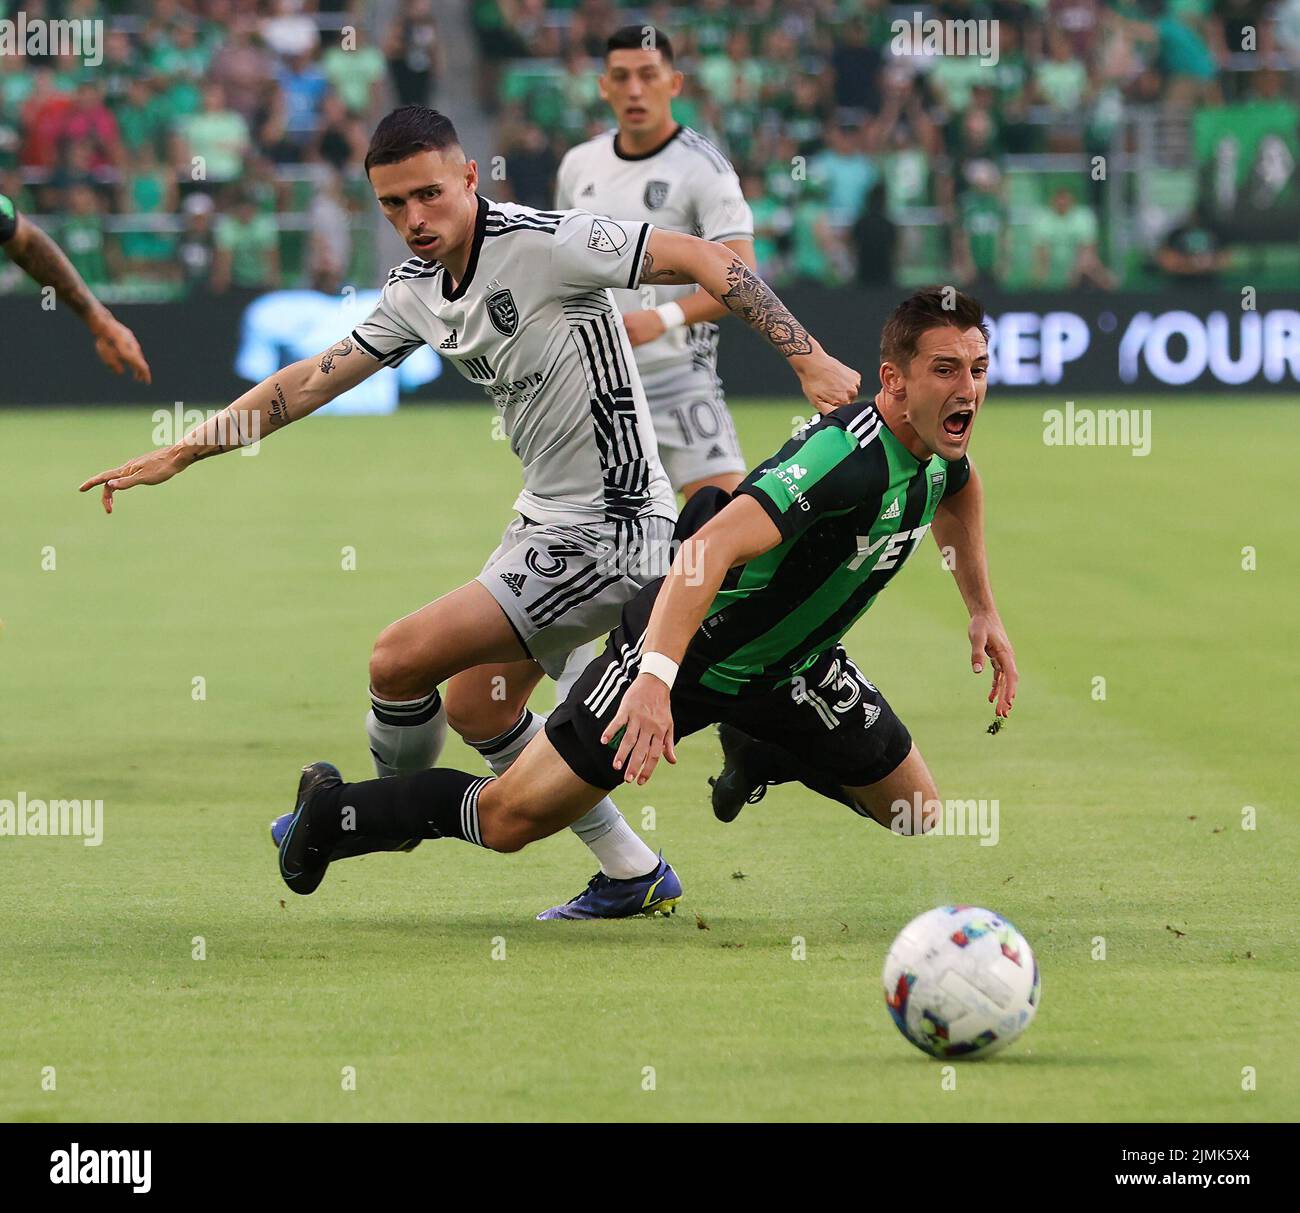 Austin, Texas, USA. 6th Aug, 2022. Austin FC midfielder Ethan Finlay (13) is fouled by San Jose Earthquakes defender Paul Marie (3) during a Major League Soccer match on August 6, 2022 in Austin, Texas. The match finished in a 3-3 draw. (Credit Image: © Scott Coleman/ZUMA Press Wire) Stock Photo